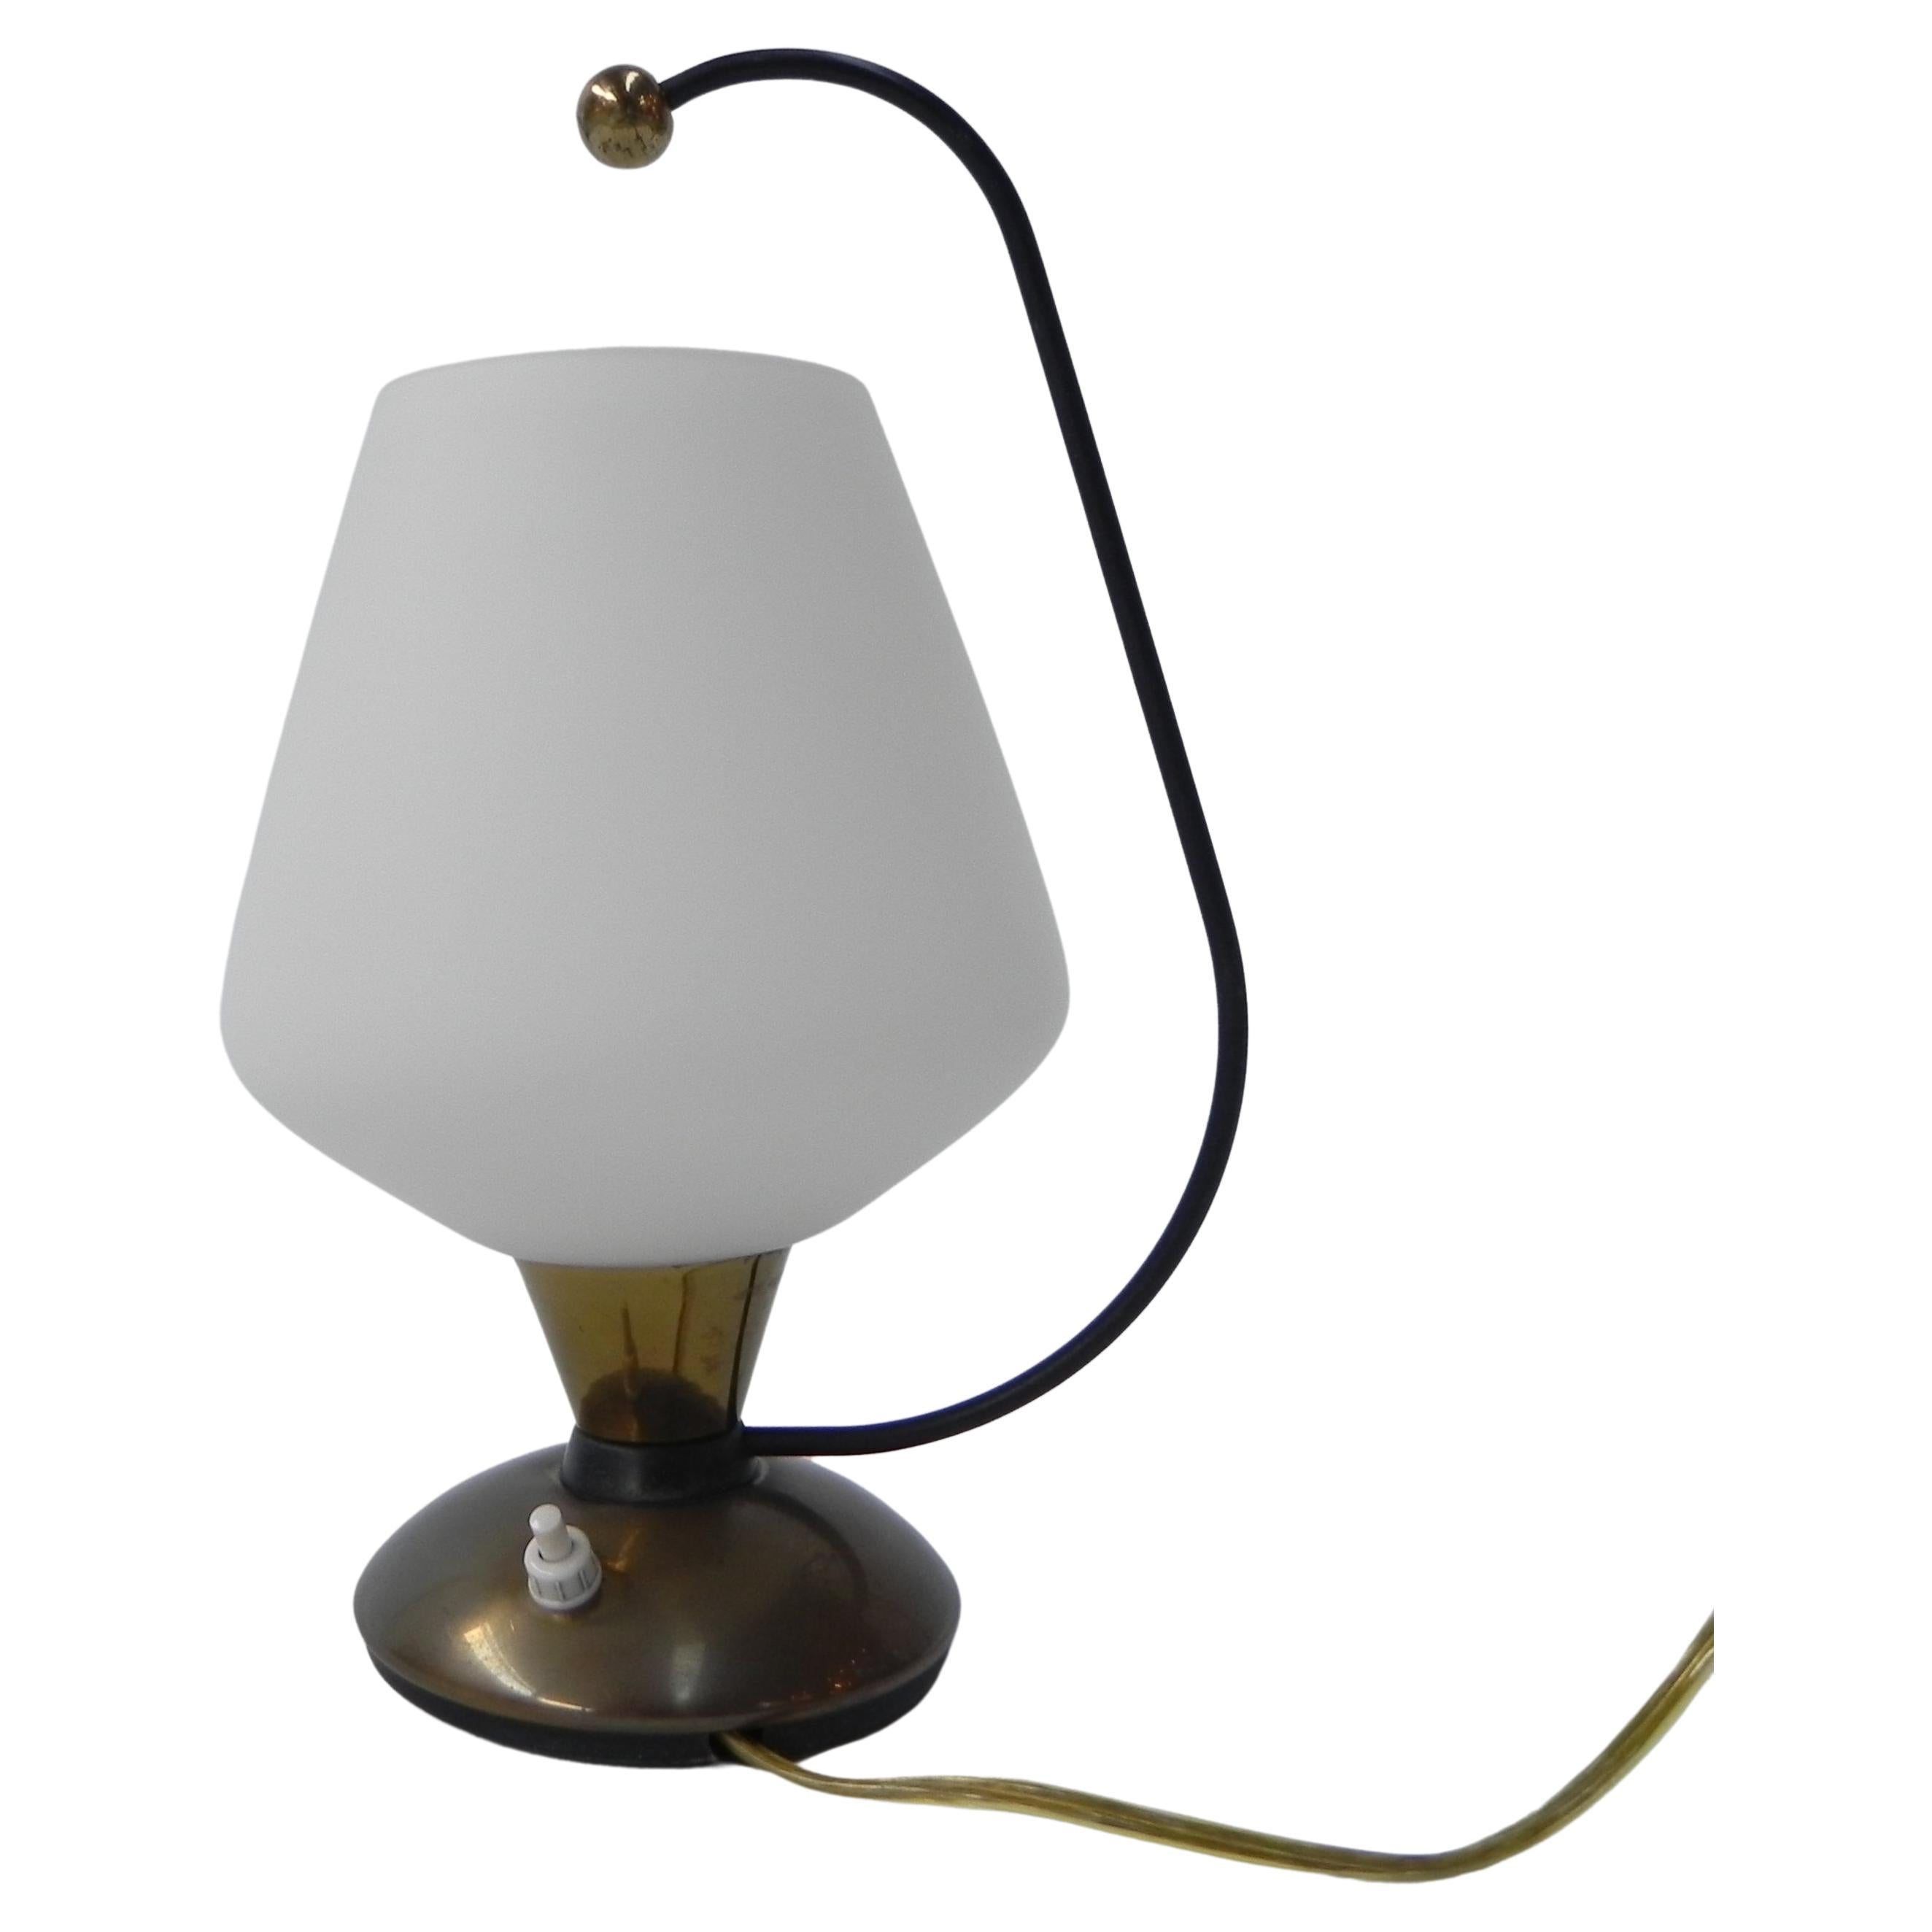 Vintage desk lamp with white glass shade